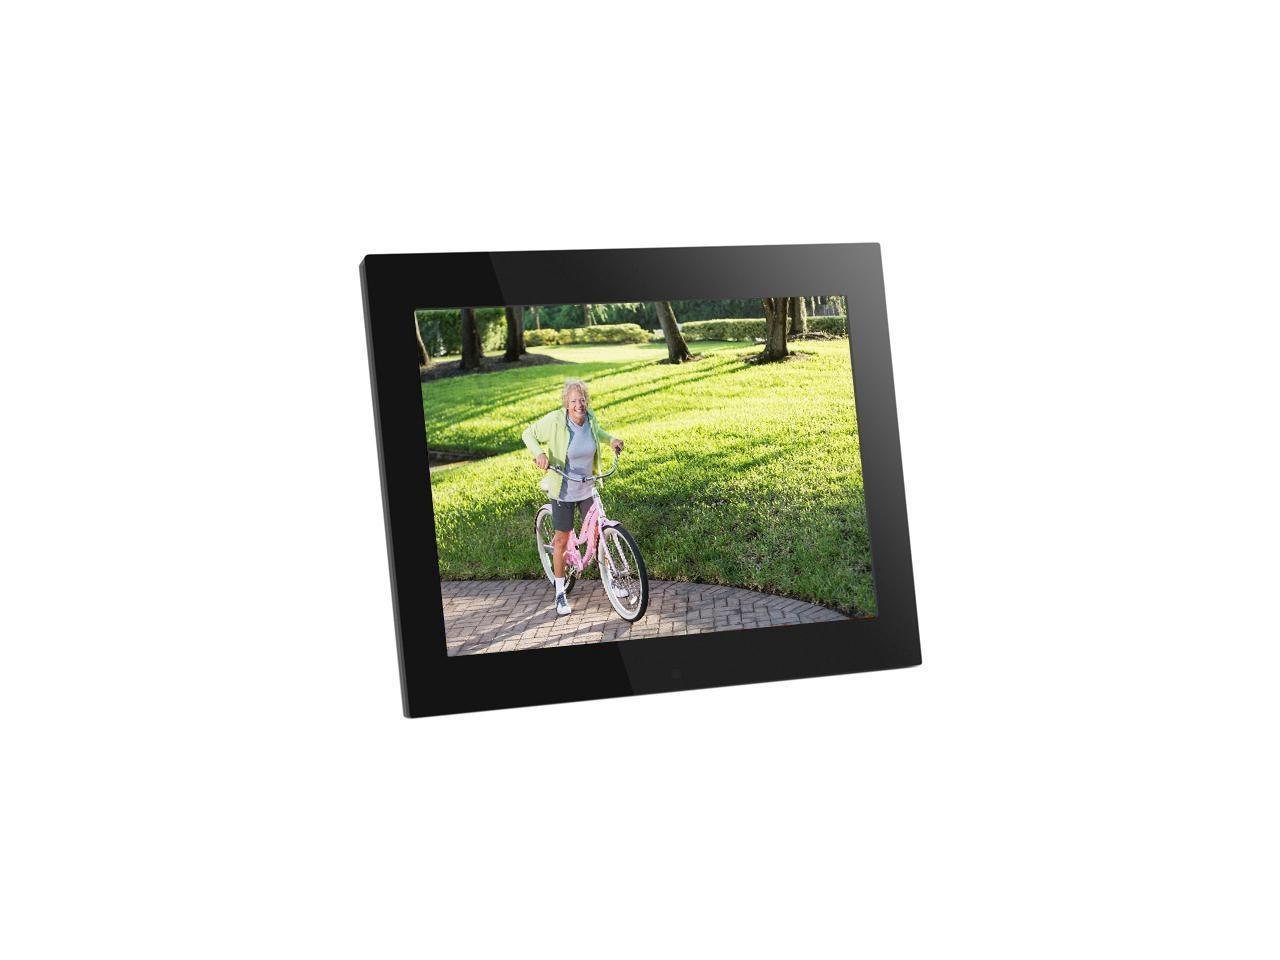 Aluratek Admpf315f 15" 1024 X 768 15" High Resolution Digital Photo Frame With 2GB Built-In Memory With Remote 1024 X 768